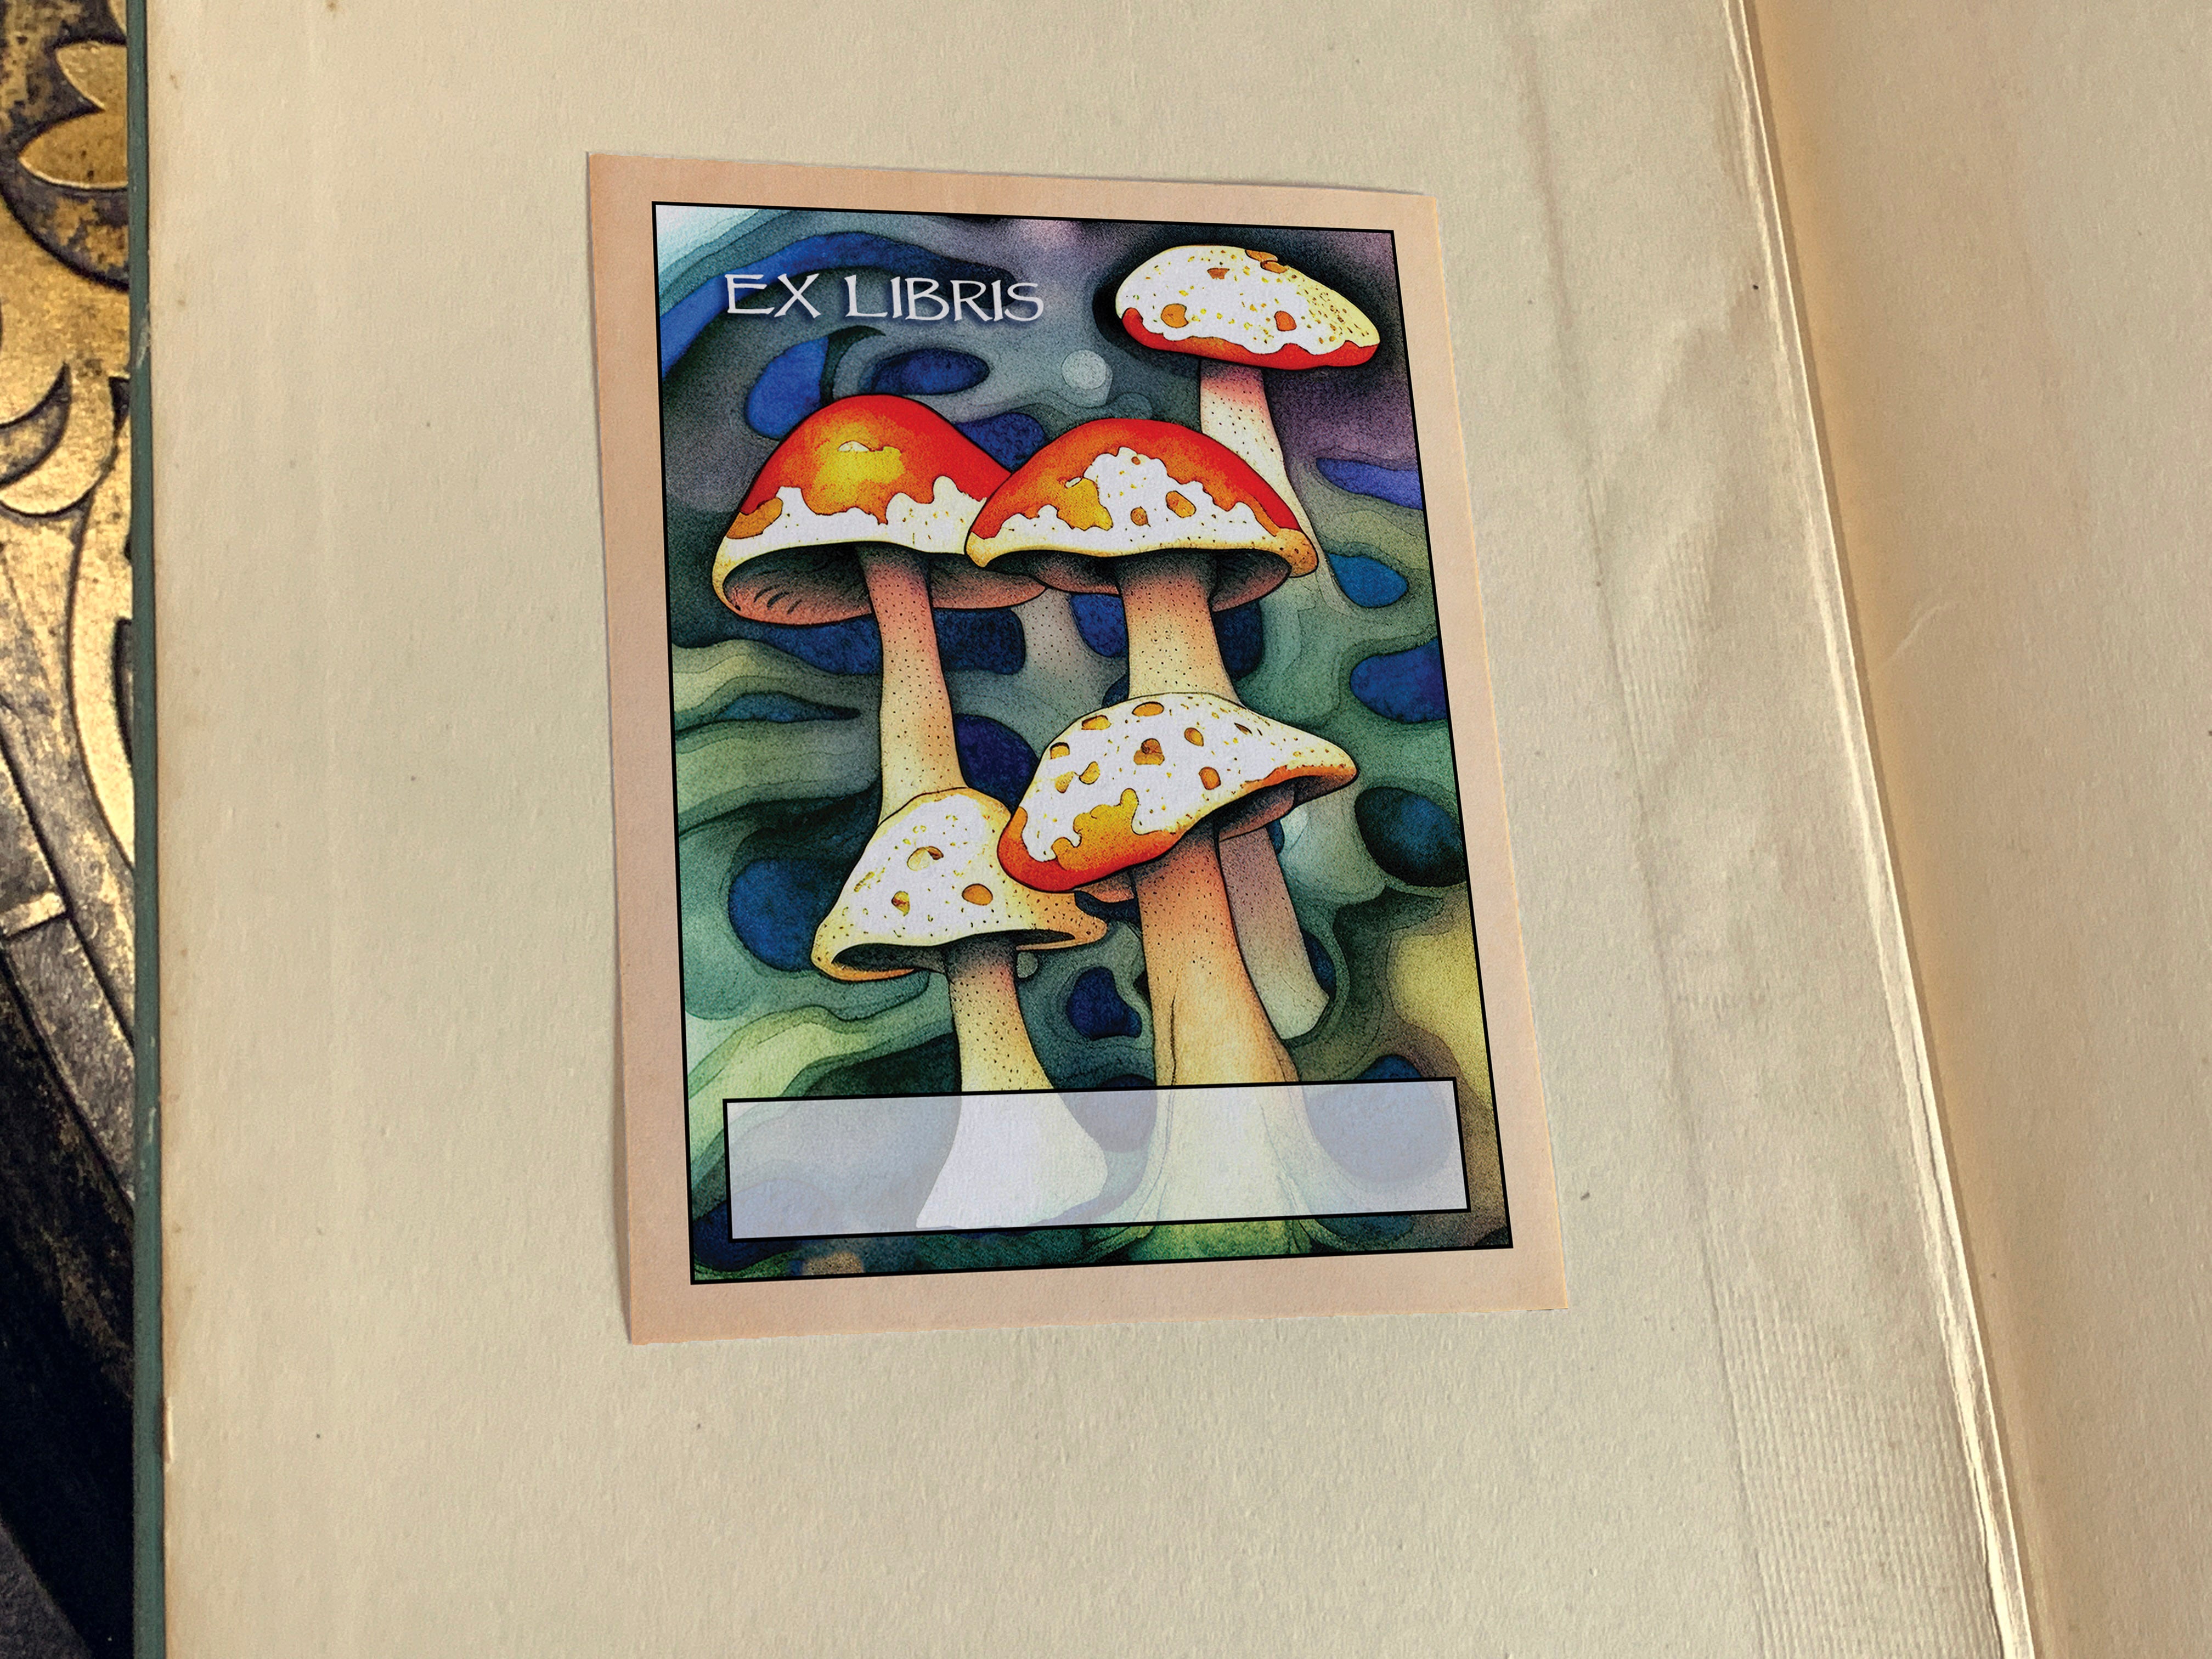 Death Cap, Personalized Ex-Libris Bookplates, Crafted on Traditional Gummed Paper, 3in x 4in, Set of 30